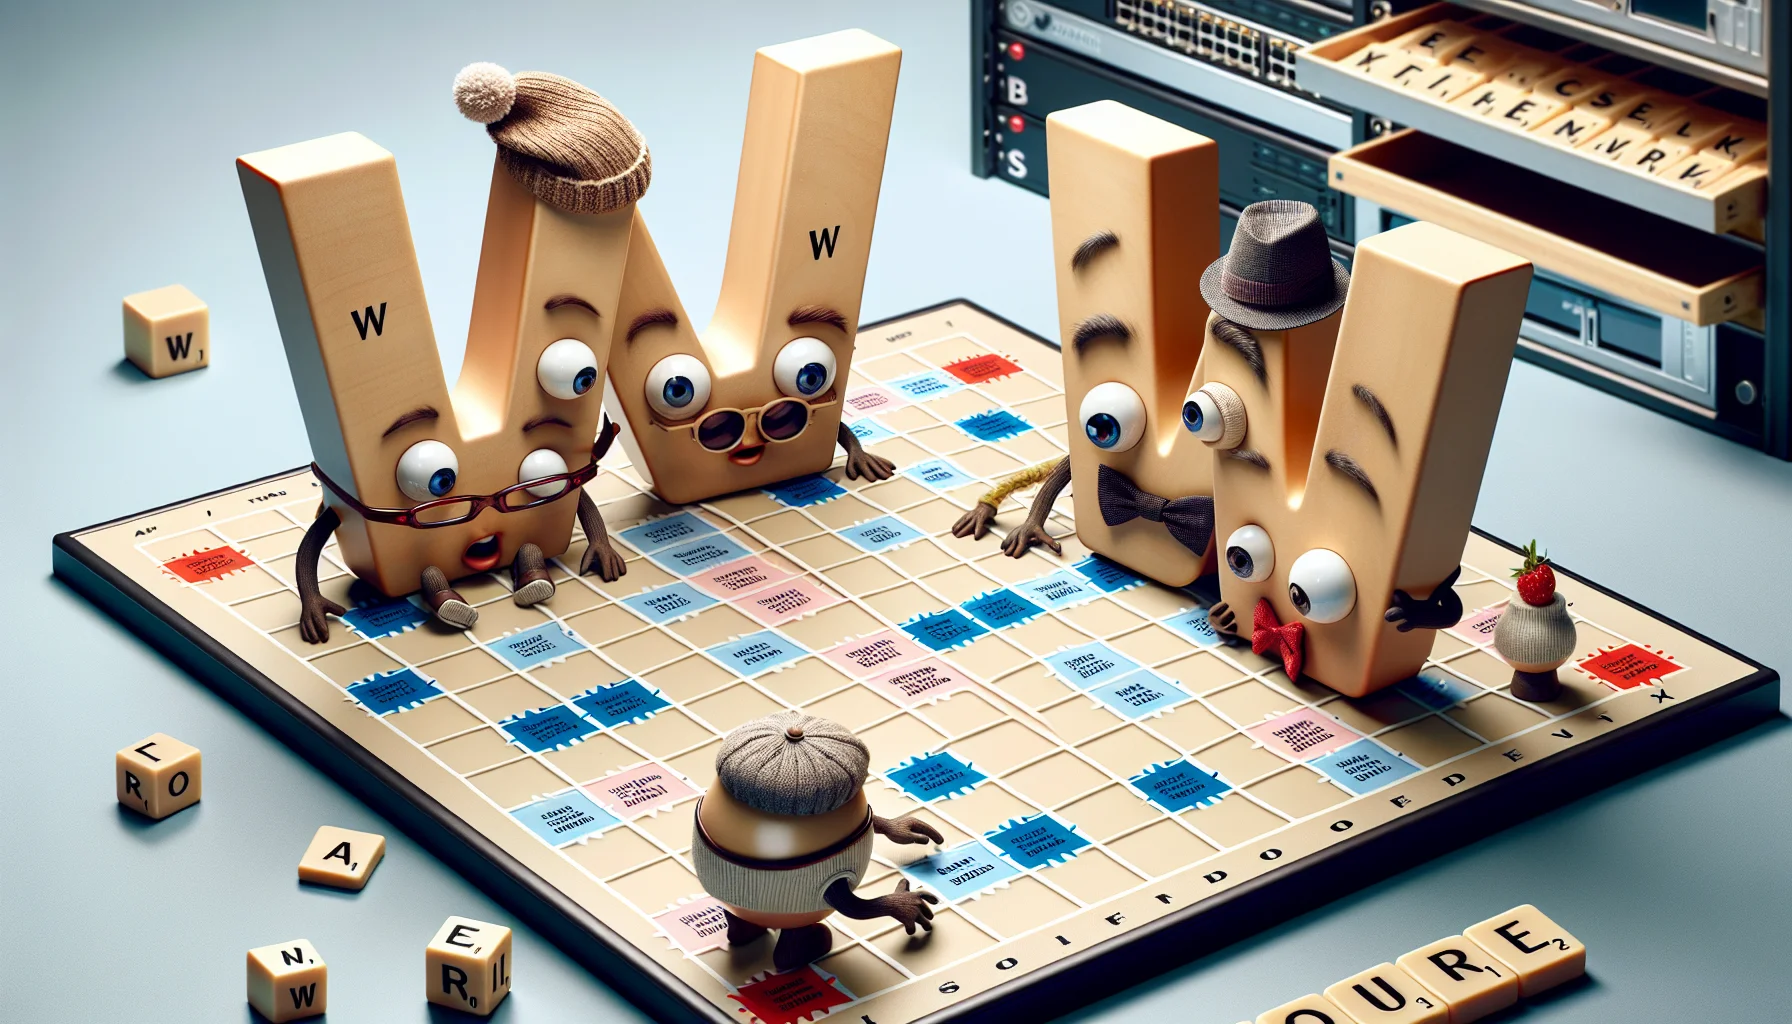 Create an image that offers a comical take on the letters 'W', 'I', and 'X' engaging in a game of scrabble. Picture this scenario: The letters themselves have sprouted small arms and legs, emotions clearly visible on their circular faces. They are dressed in various fun accessories like novelty glasses, bow ties and party hats. Their expressions are of intense concentration, perhaps mirroring the seriousness of professional web-hosting scenarios. In the background, there are subtle elements suggesting web hosting environments, such as a server rack or a network diagram, placed cleverly within the context of a traditional board game setup.